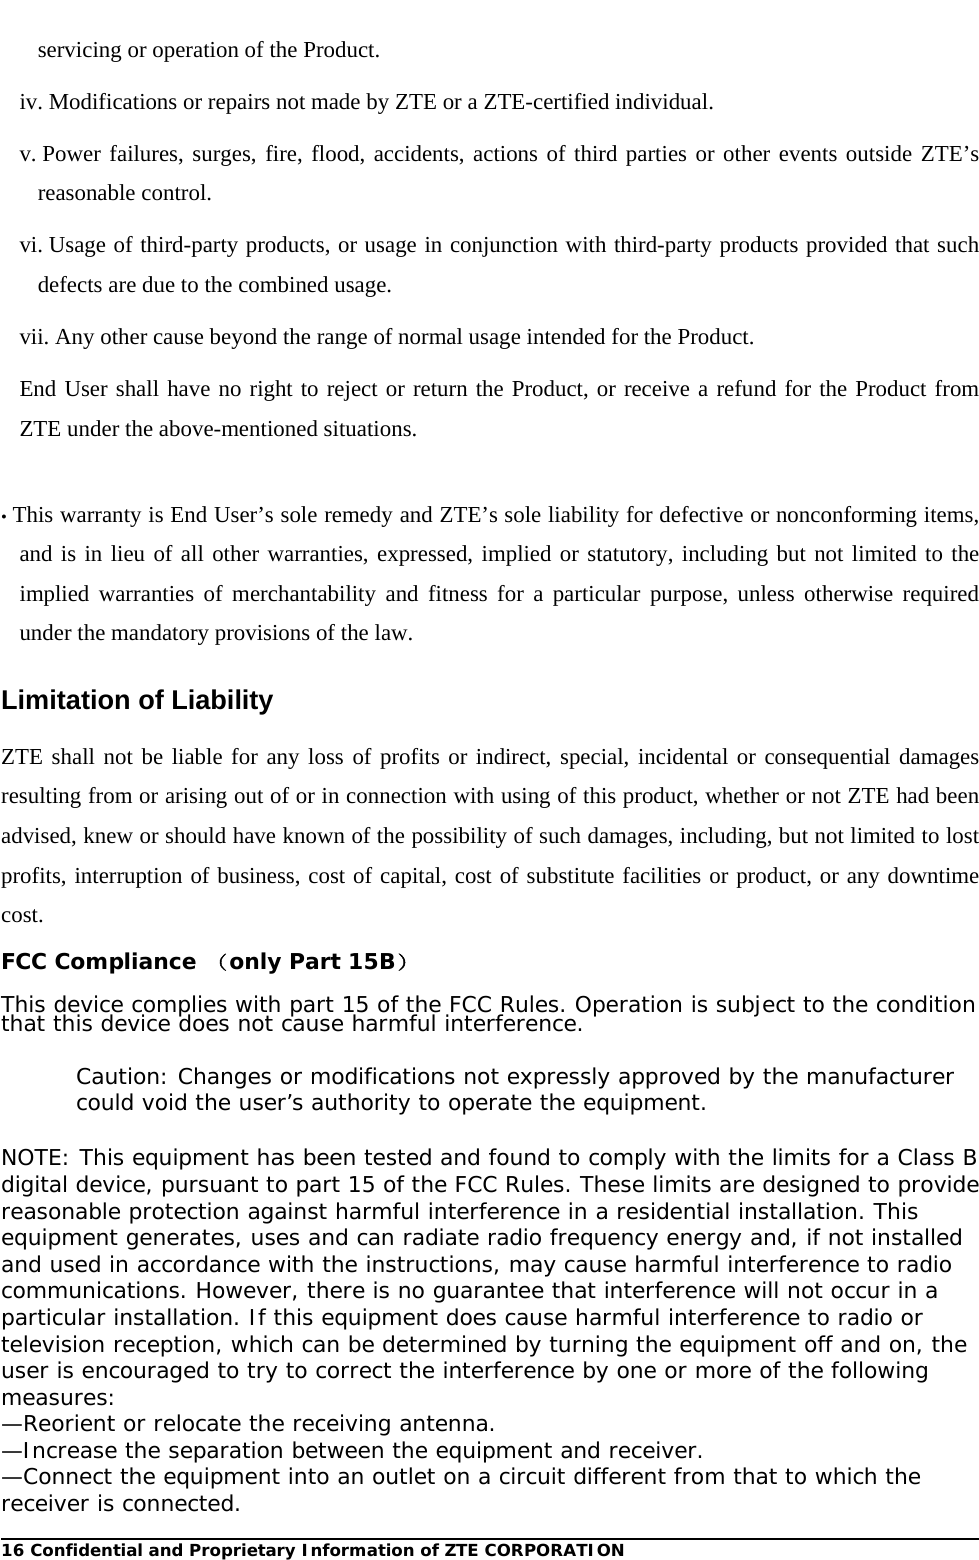  16 Confidential and Proprietary Information of ZTE CORPORATIONservicing or operation of the Product. iv. Modifications or repairs not made by ZTE or a ZTE-certified individual. v. Power failures, surges, fire, flood, accidents, actions of third parties or other events outside ZTE’s reasonable control. vi. Usage of third-party products, or usage in conjunction with third-party products provided that such defects are due to the combined usage. vii. Any other cause beyond the range of normal usage intended for the Product. End User shall have no right to reject or return the Product, or receive a refund for the Product from ZTE under the above-mentioned situations.  • This warranty is End User’s sole remedy and ZTE’s sole liability for defective or nonconforming items, and is in lieu of all other warranties, expressed, implied or statutory, including but not limited to the implied warranties of merchantability and fitness for a particular purpose, unless otherwise required under the mandatory provisions of the law. Limitation of Liability ZTE shall not be liable for any loss of profits or indirect, special, incidental or consequential damages resulting from or arising out of or in connection with using of this product, whether or not ZTE had been advised, knew or should have known of the possibility of such damages, including, but not limited to lost profits, interruption of business, cost of capital, cost of substitute facilities or product, or any downtime cost. FCC Compliance （only Part 15B）  This device complies with part 15 of the FCC Rules. Operation is subject to the condition that this device does not cause harmful interference.  Caution: Changes or modifications not expressly approved by the manufacturer could void the user’s authority to operate the equipment.  NOTE: This equipment has been tested and found to comply with the limits for a Class B digital device, pursuant to part 15 of the FCC Rules. These limits are designed to provide reasonable protection against harmful interference in a residential installation. This equipment generates, uses and can radiate radio frequency energy and, if not installed and used in accordance with the instructions, may cause harmful interference to radio communications. However, there is no guarantee that interference will not occur in a particular installation. If this equipment does cause harmful interference to radio or television reception, which can be determined by turning the equipment off and on, the user is encouraged to try to correct the interference by one or more of the following measures: —Reorient or relocate the receiving antenna. —Increase the separation between the equipment and receiver. —Connect the equipment into an outlet on a circuit different from that to which the receiver is connected. 